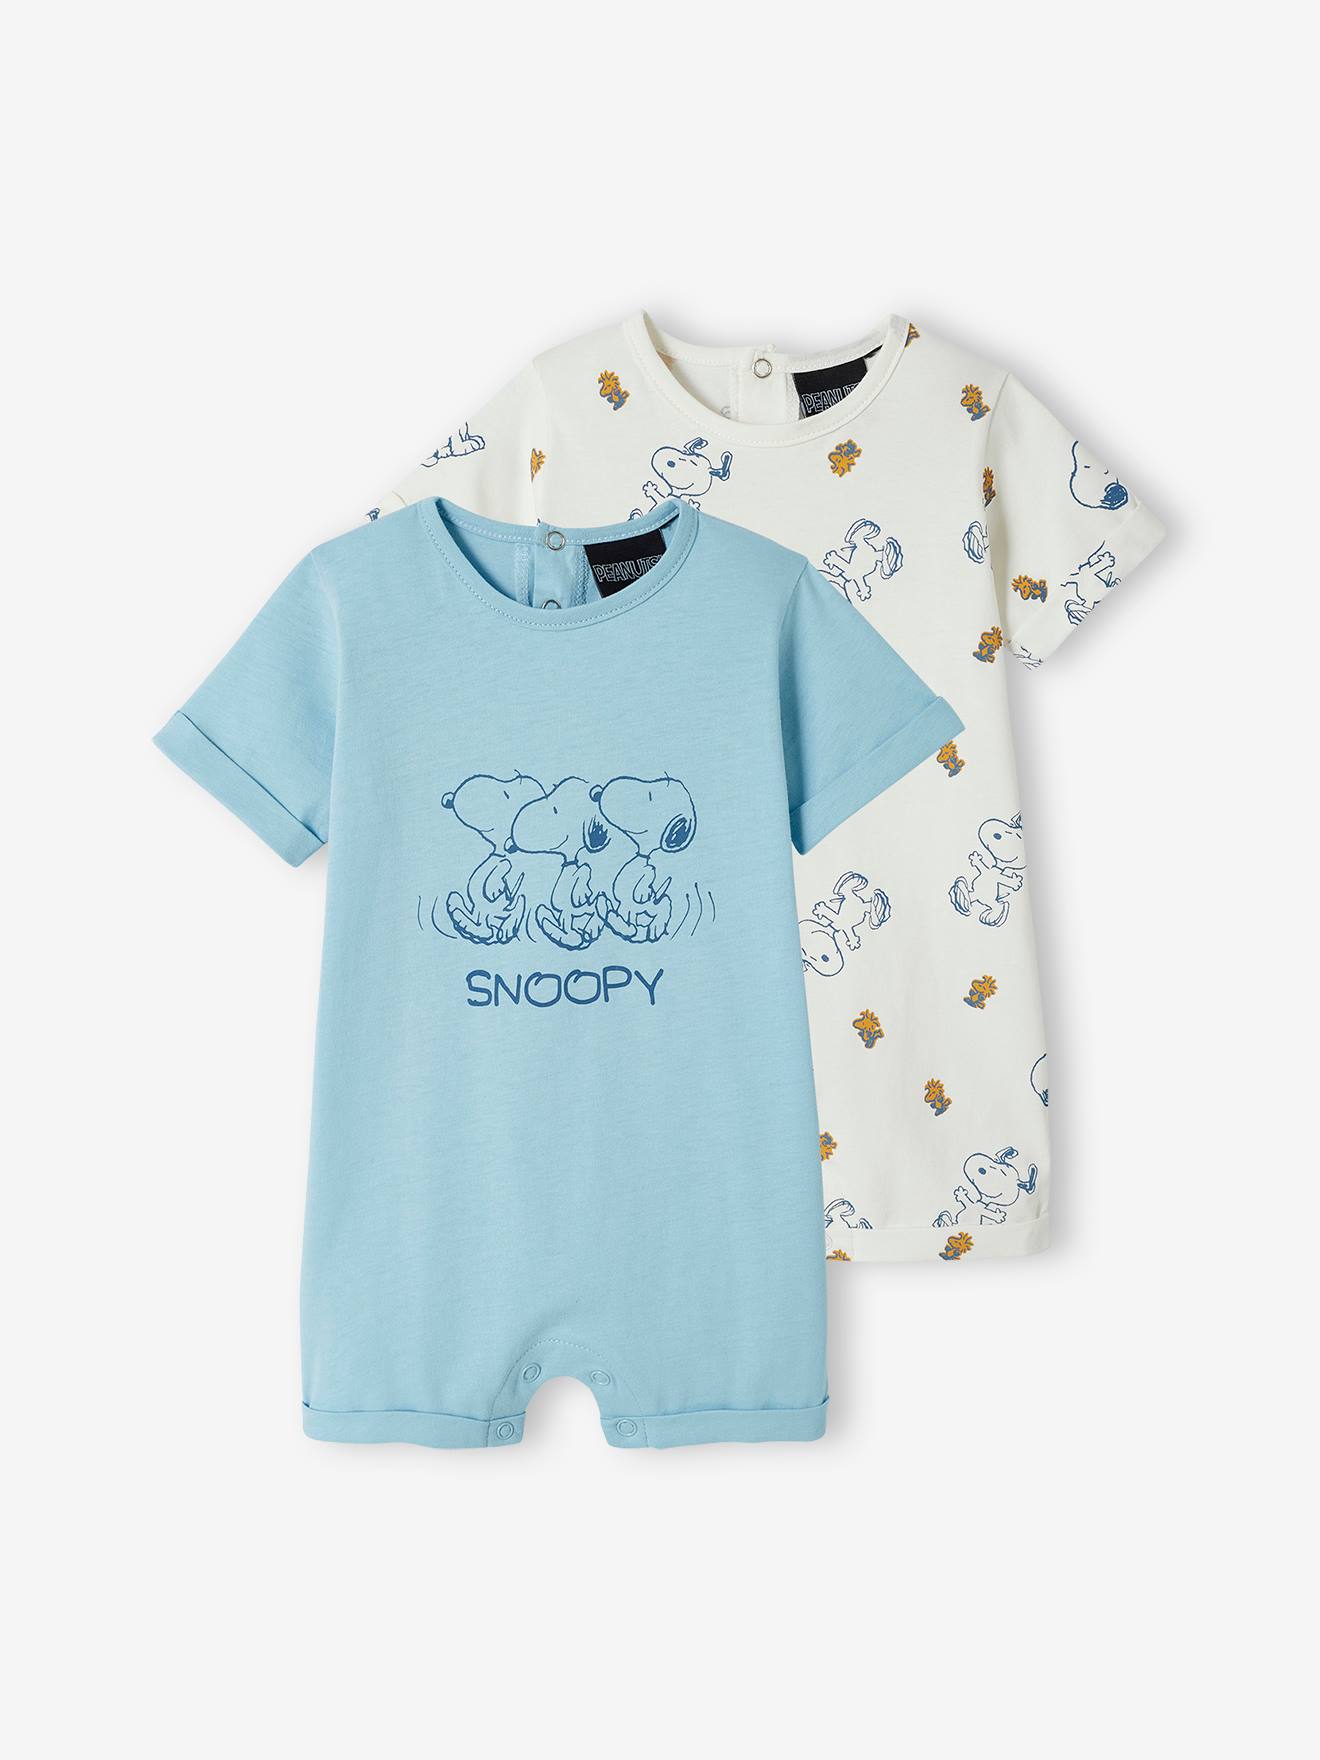 Pack of 2 Snoopy Playsuits for Baby Boys, by Peanuts(r)